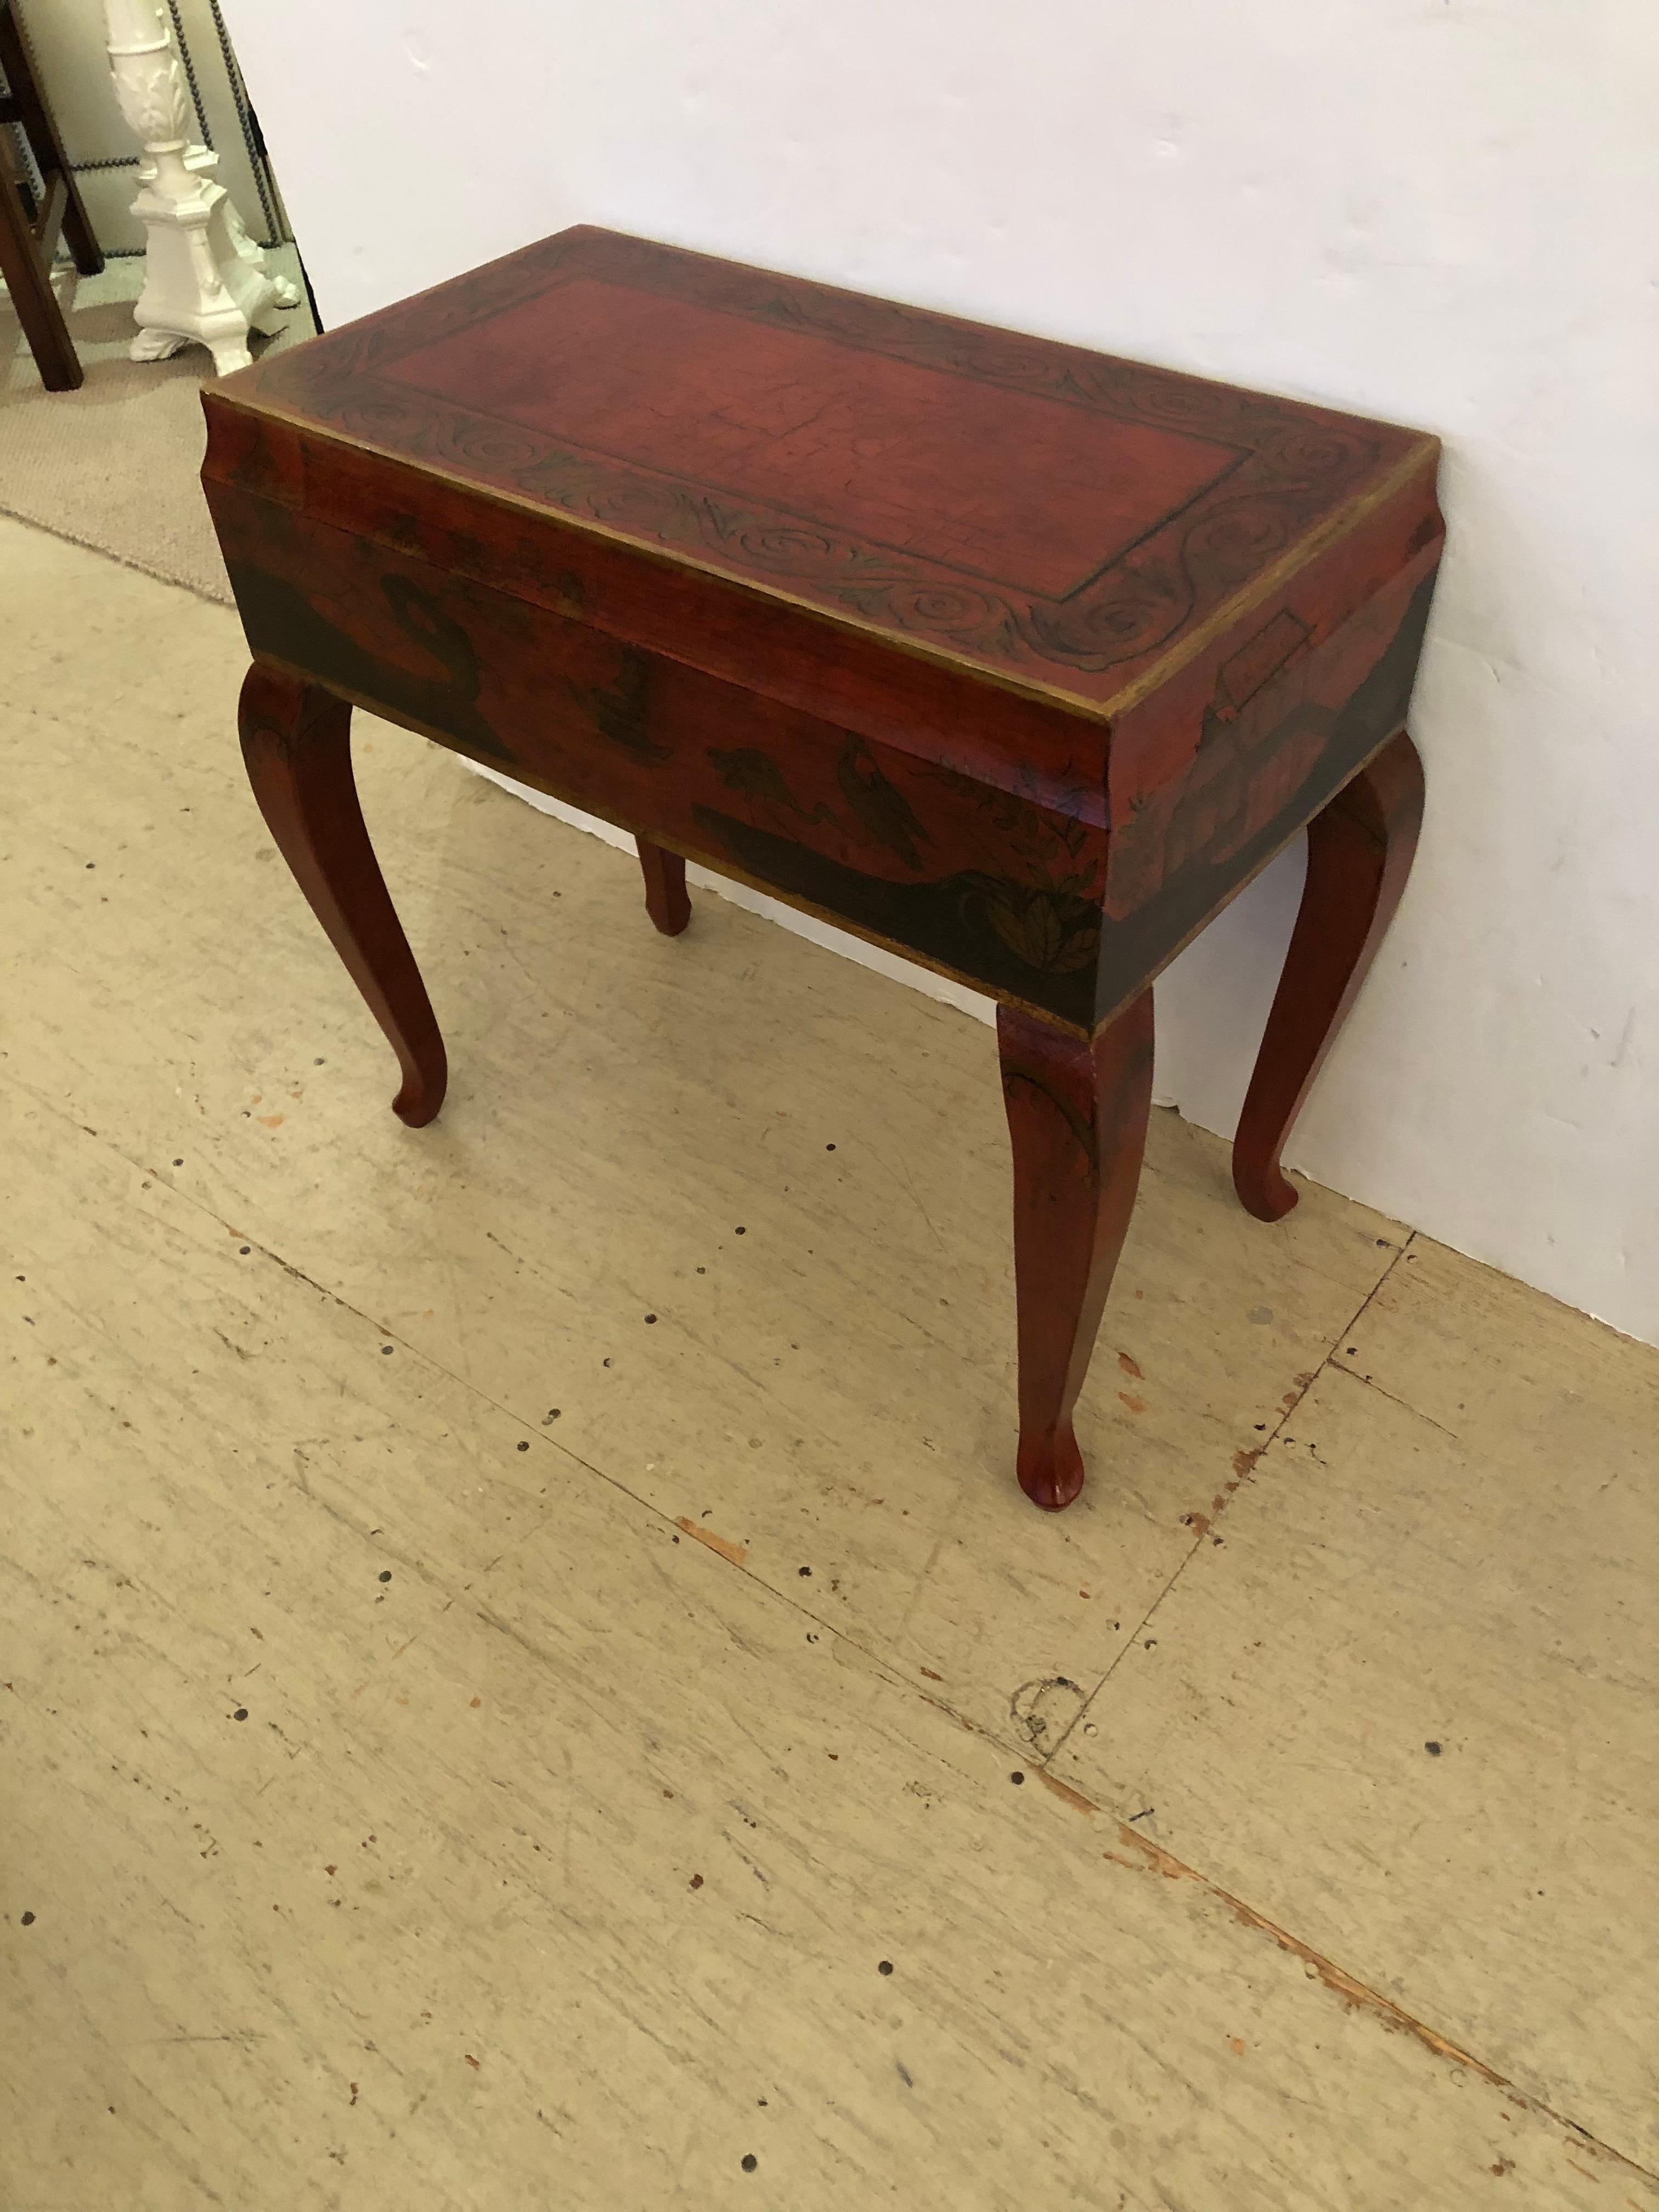 Beautiful red, black and gold rectangular end table having crackle finish top and gorgeous chinoiserie painted decoration. The exaggerated cabriole legs add a nice stylish touch.